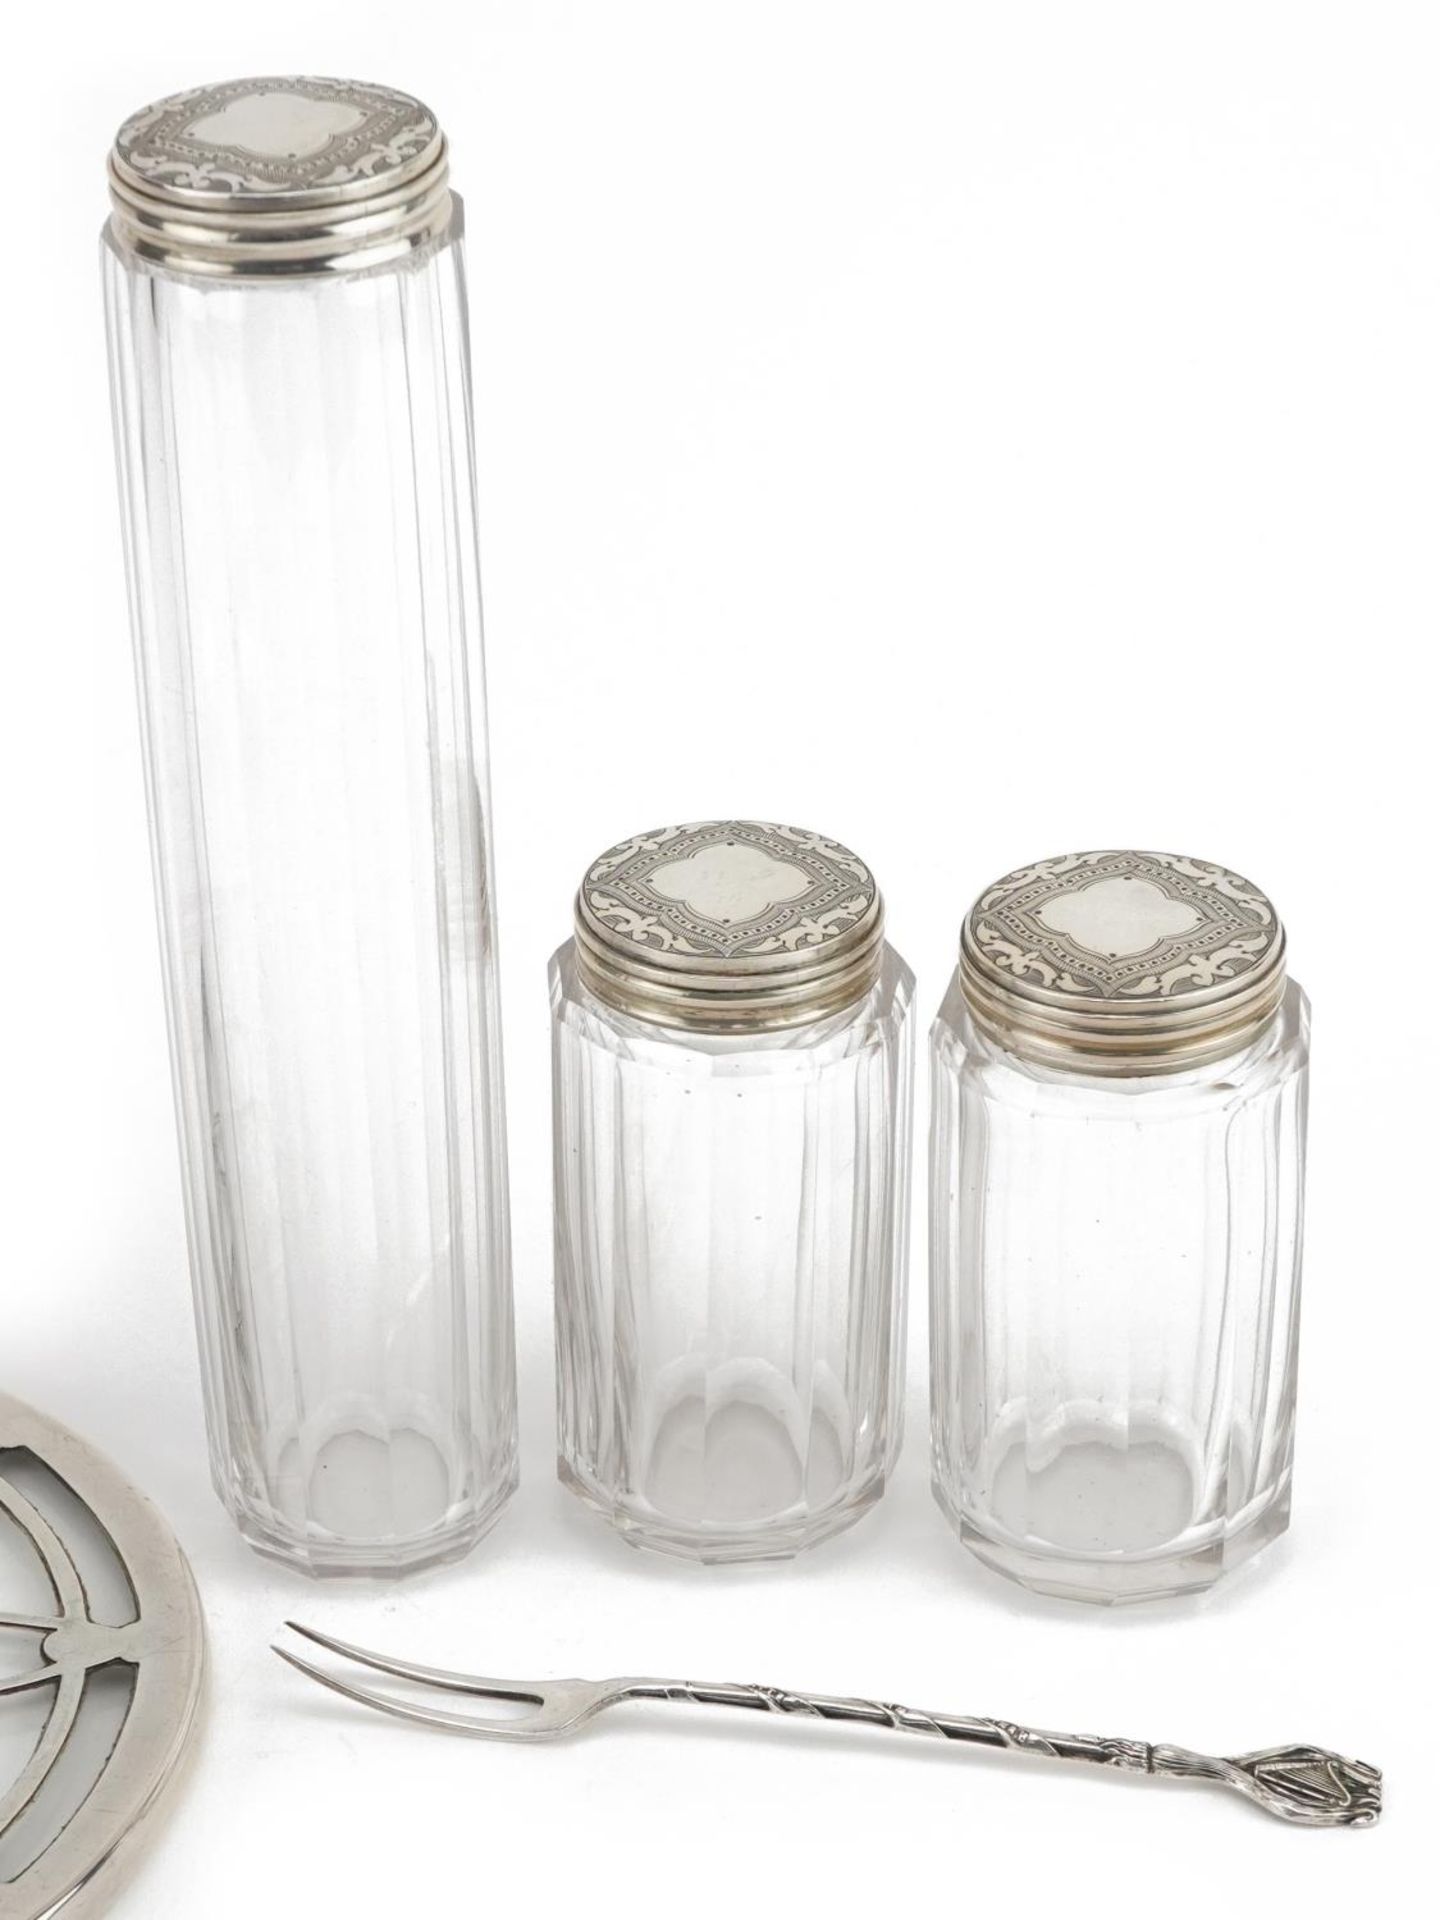 Three Victorian cut glass jars with silver lids, silver overlaid glass coaster and a silver fork, - Image 3 of 5